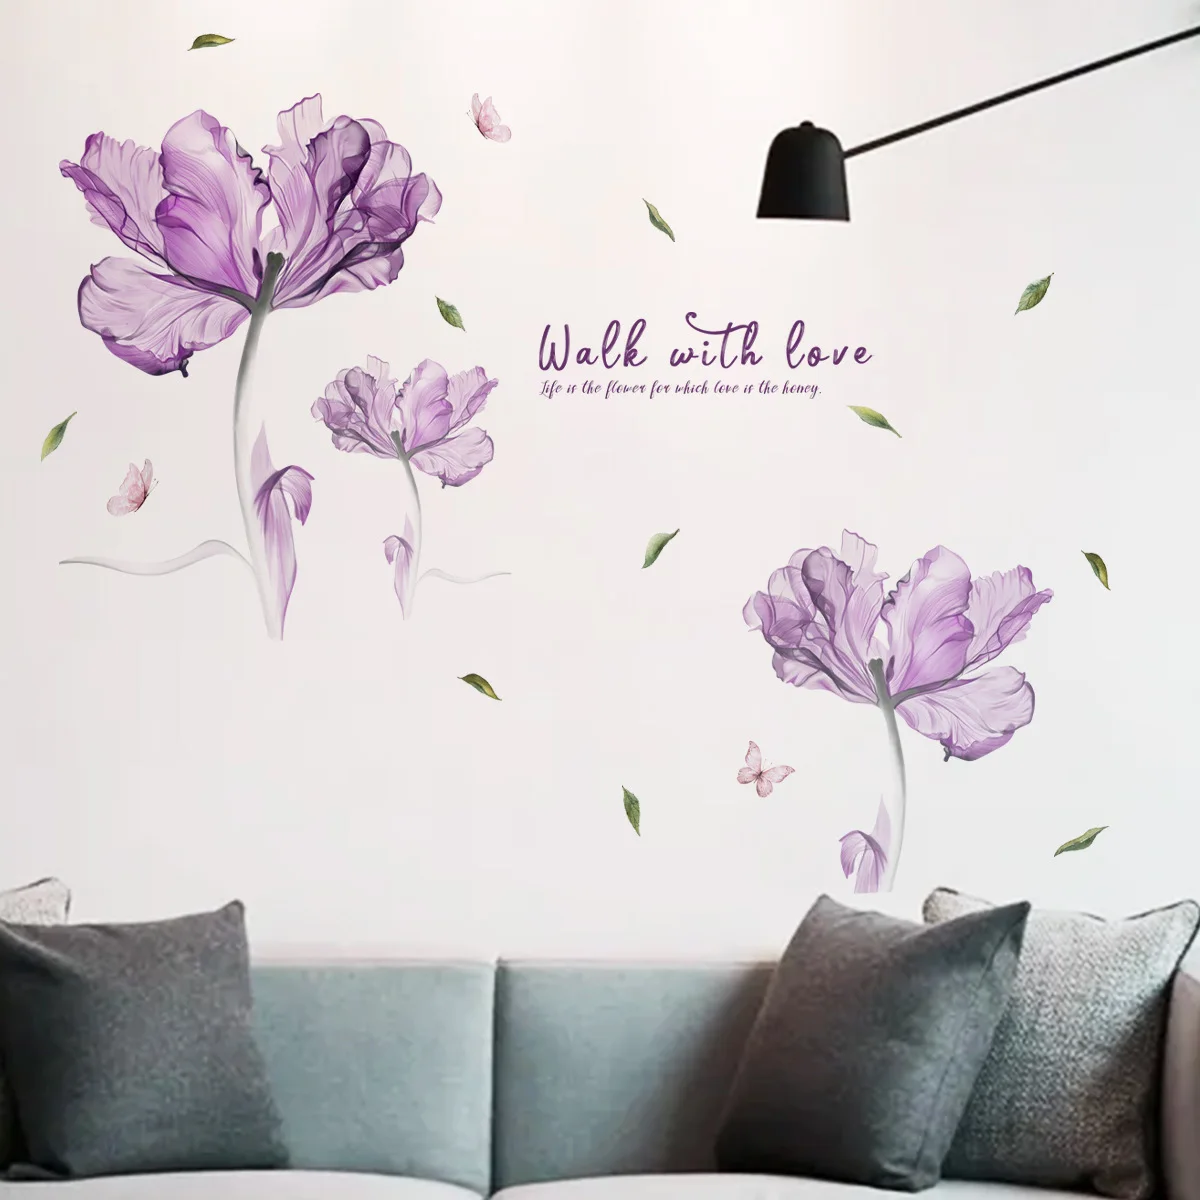 Large Purple Blossom Flower Butterfly Wall Stickers Art Decal Home Room Decor 